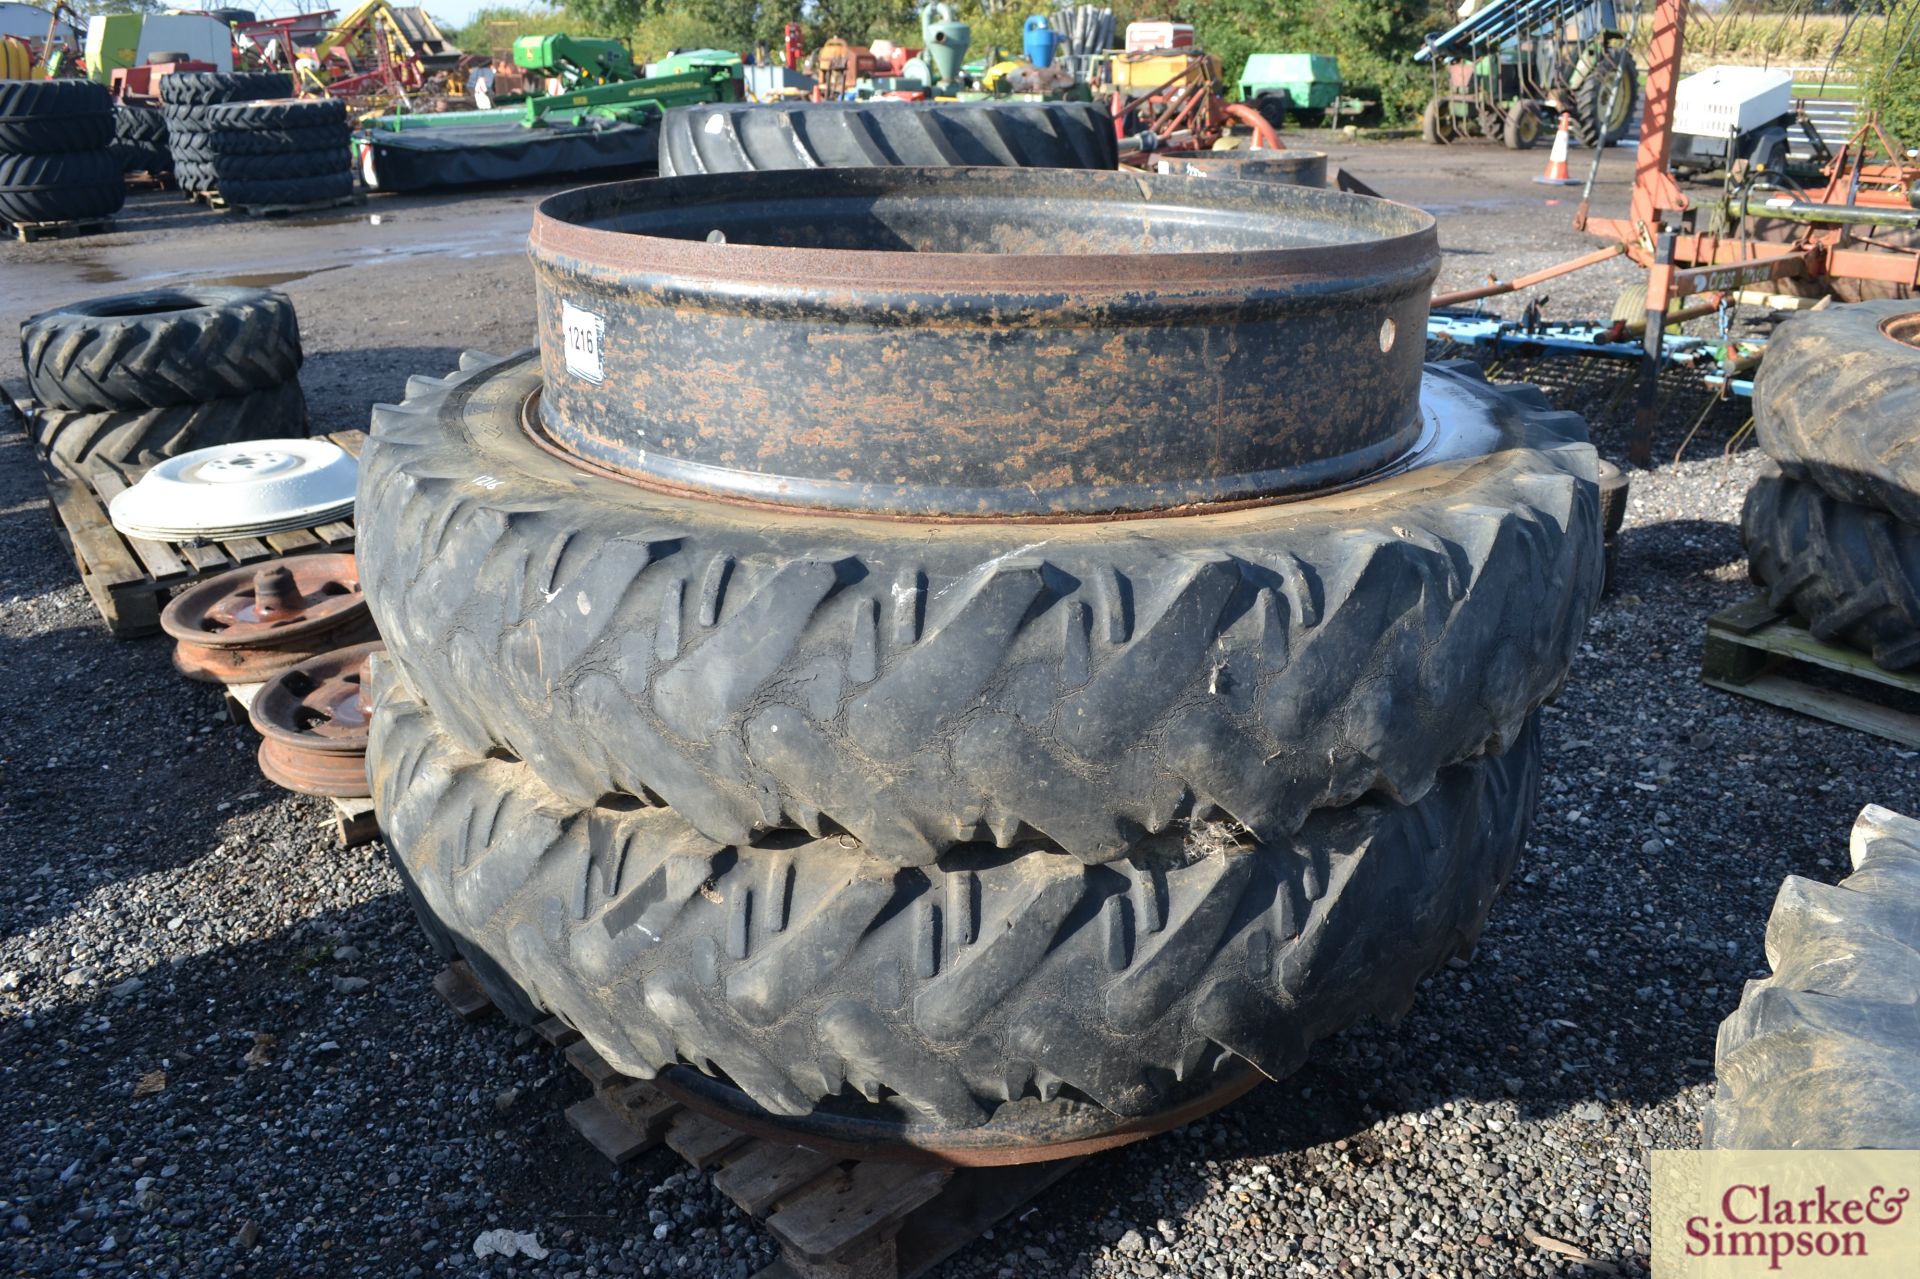 12.4R46 Stocks row crop dual wheels and tyres. Wi